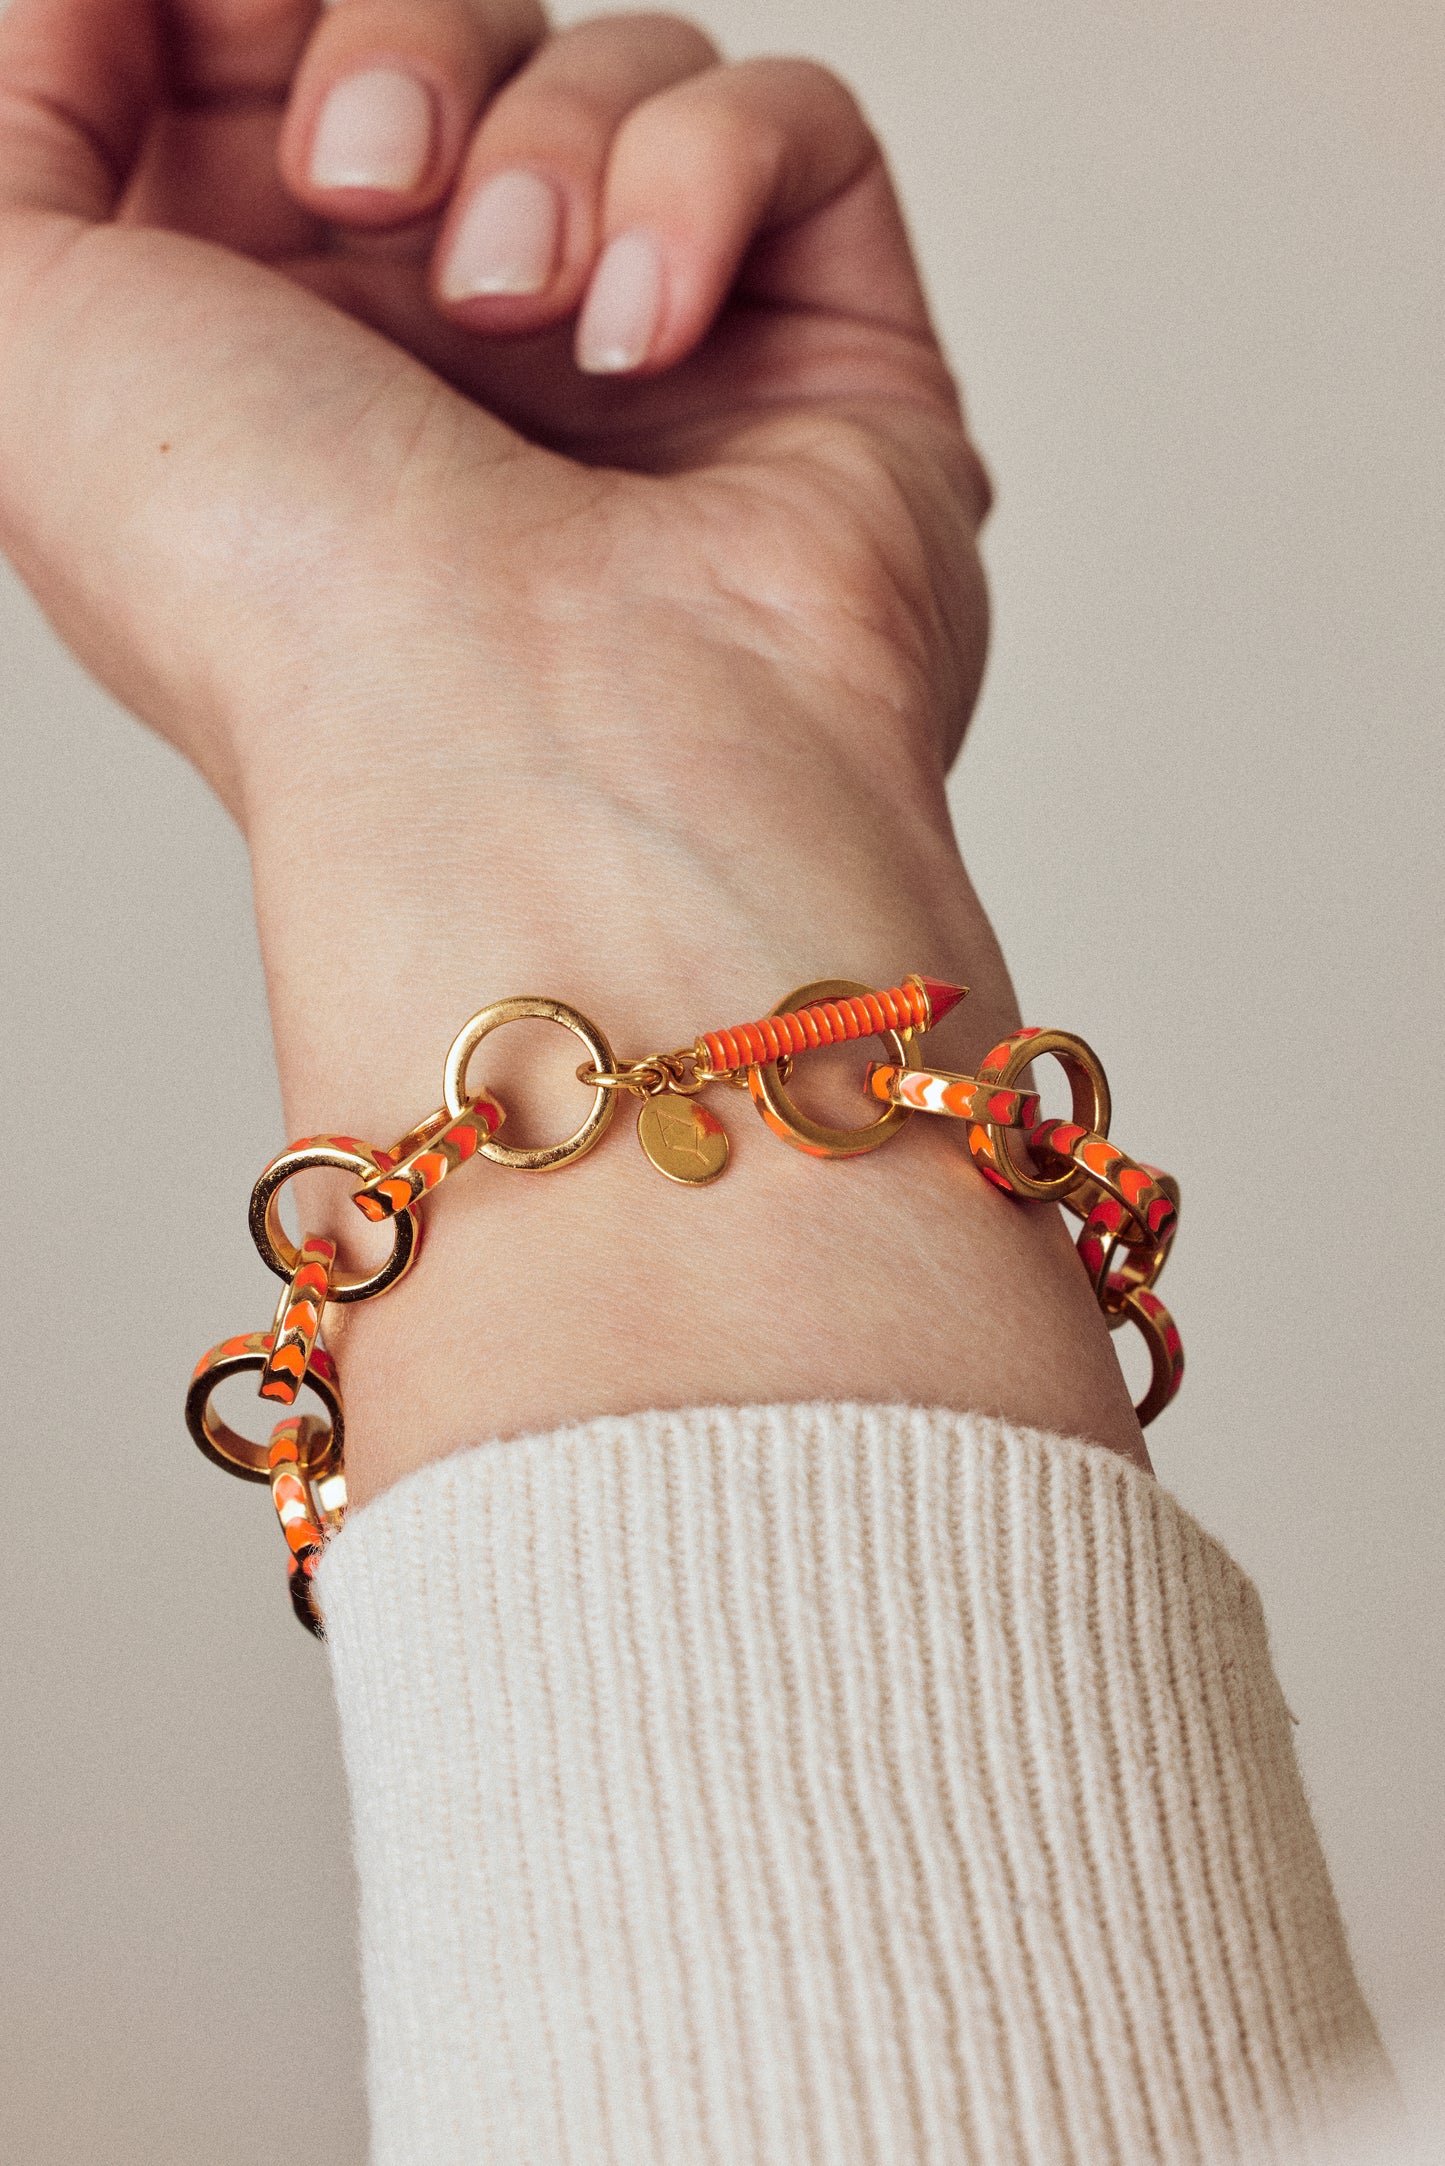 image of spark gold chain bracelet in orange and gold on wrist with arm outstretched and fingers clenched